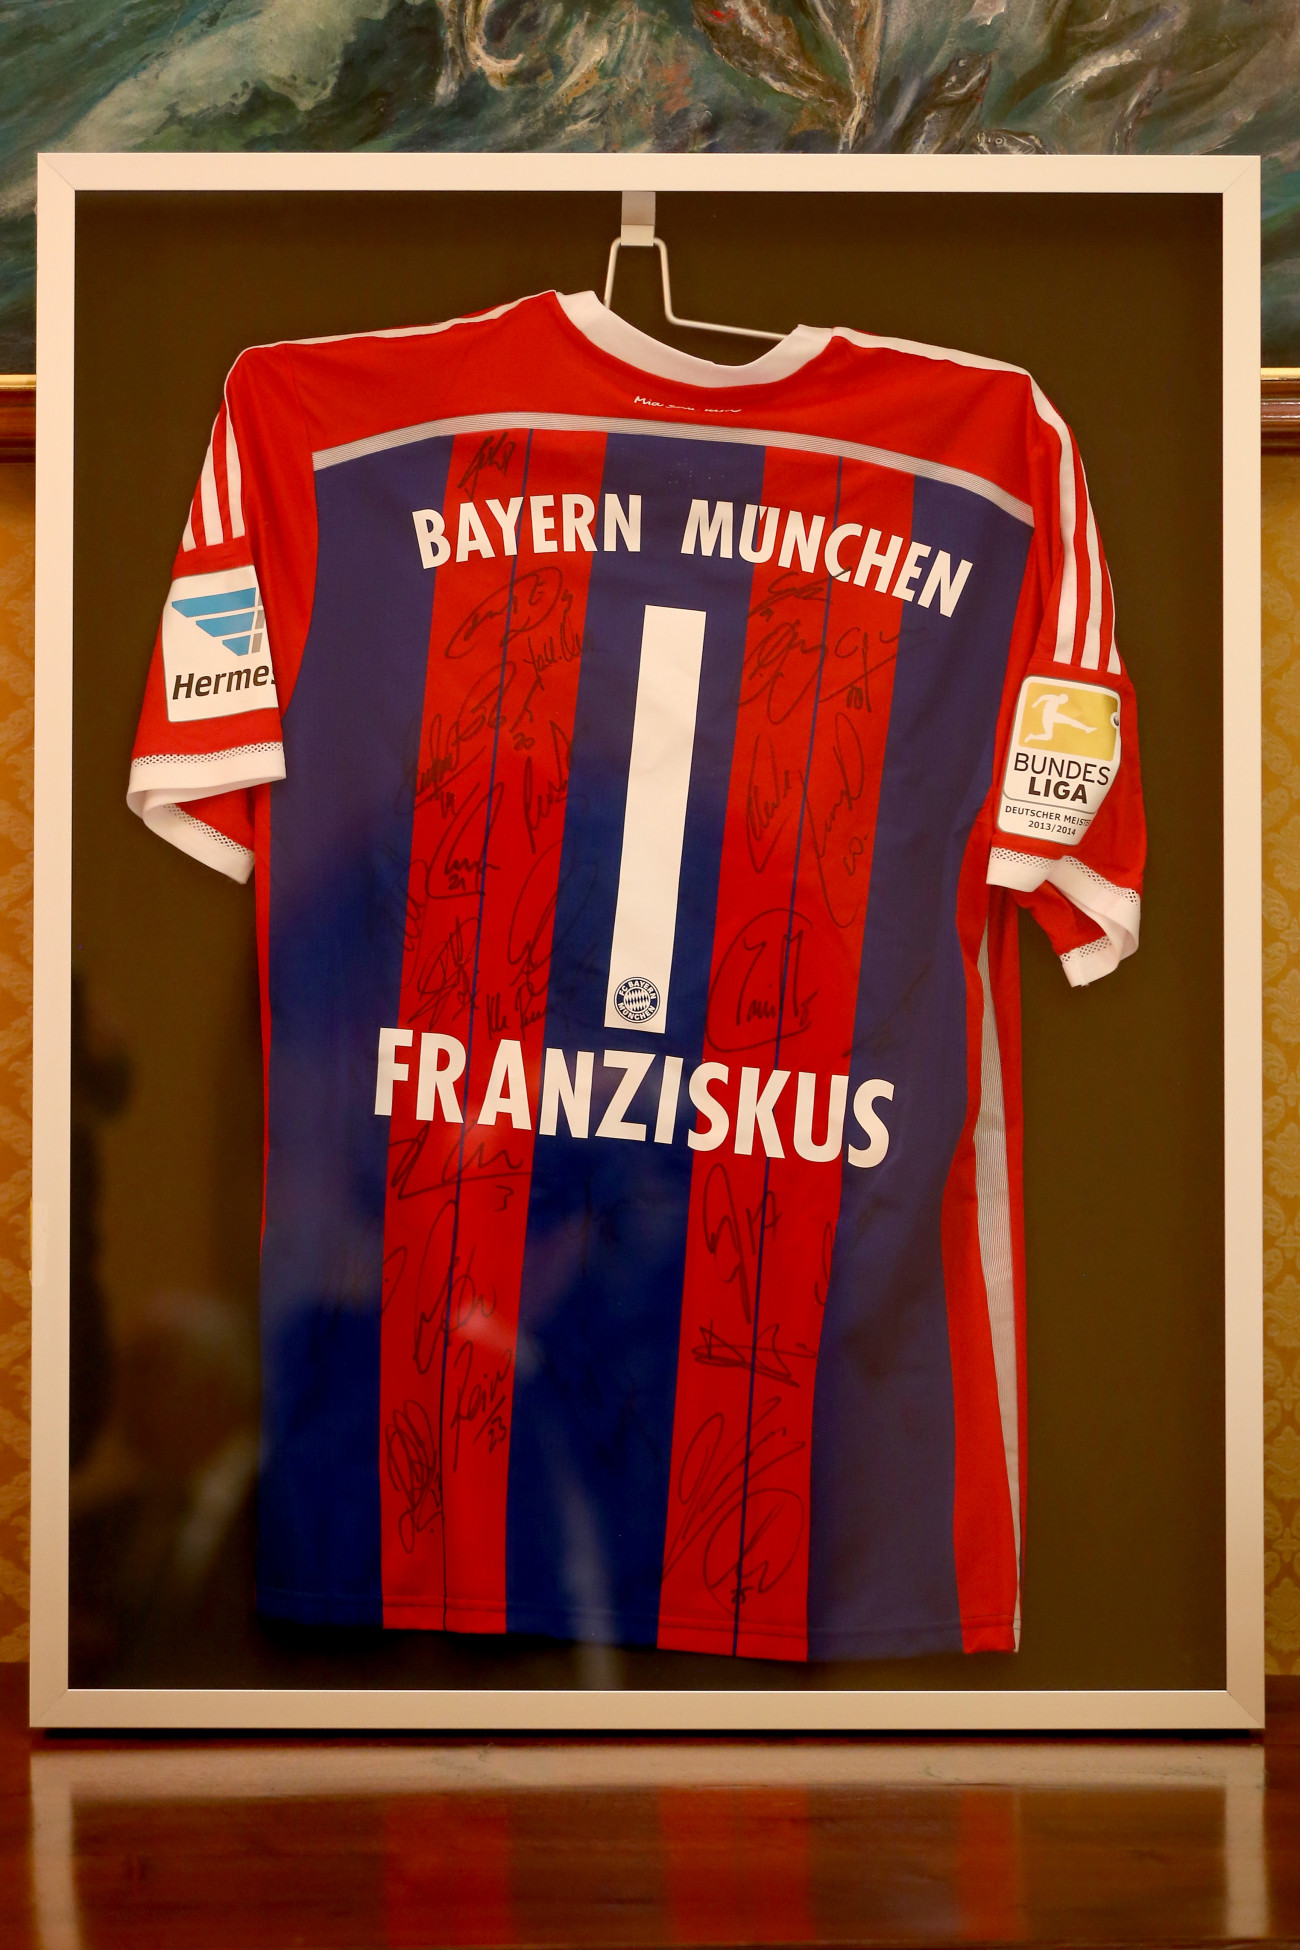 VATICAN CITY, VATICAN - OCTOBER 22: The gift of FC Bayern Muenchen for Pope Francis is displayed during an private audience with Pope Francis in the Palace of the Vatican on October 22, 2014 in Vatican City, Vatican.  (Photo by Alexander Hassenstein/Bongarts/Getty Images)